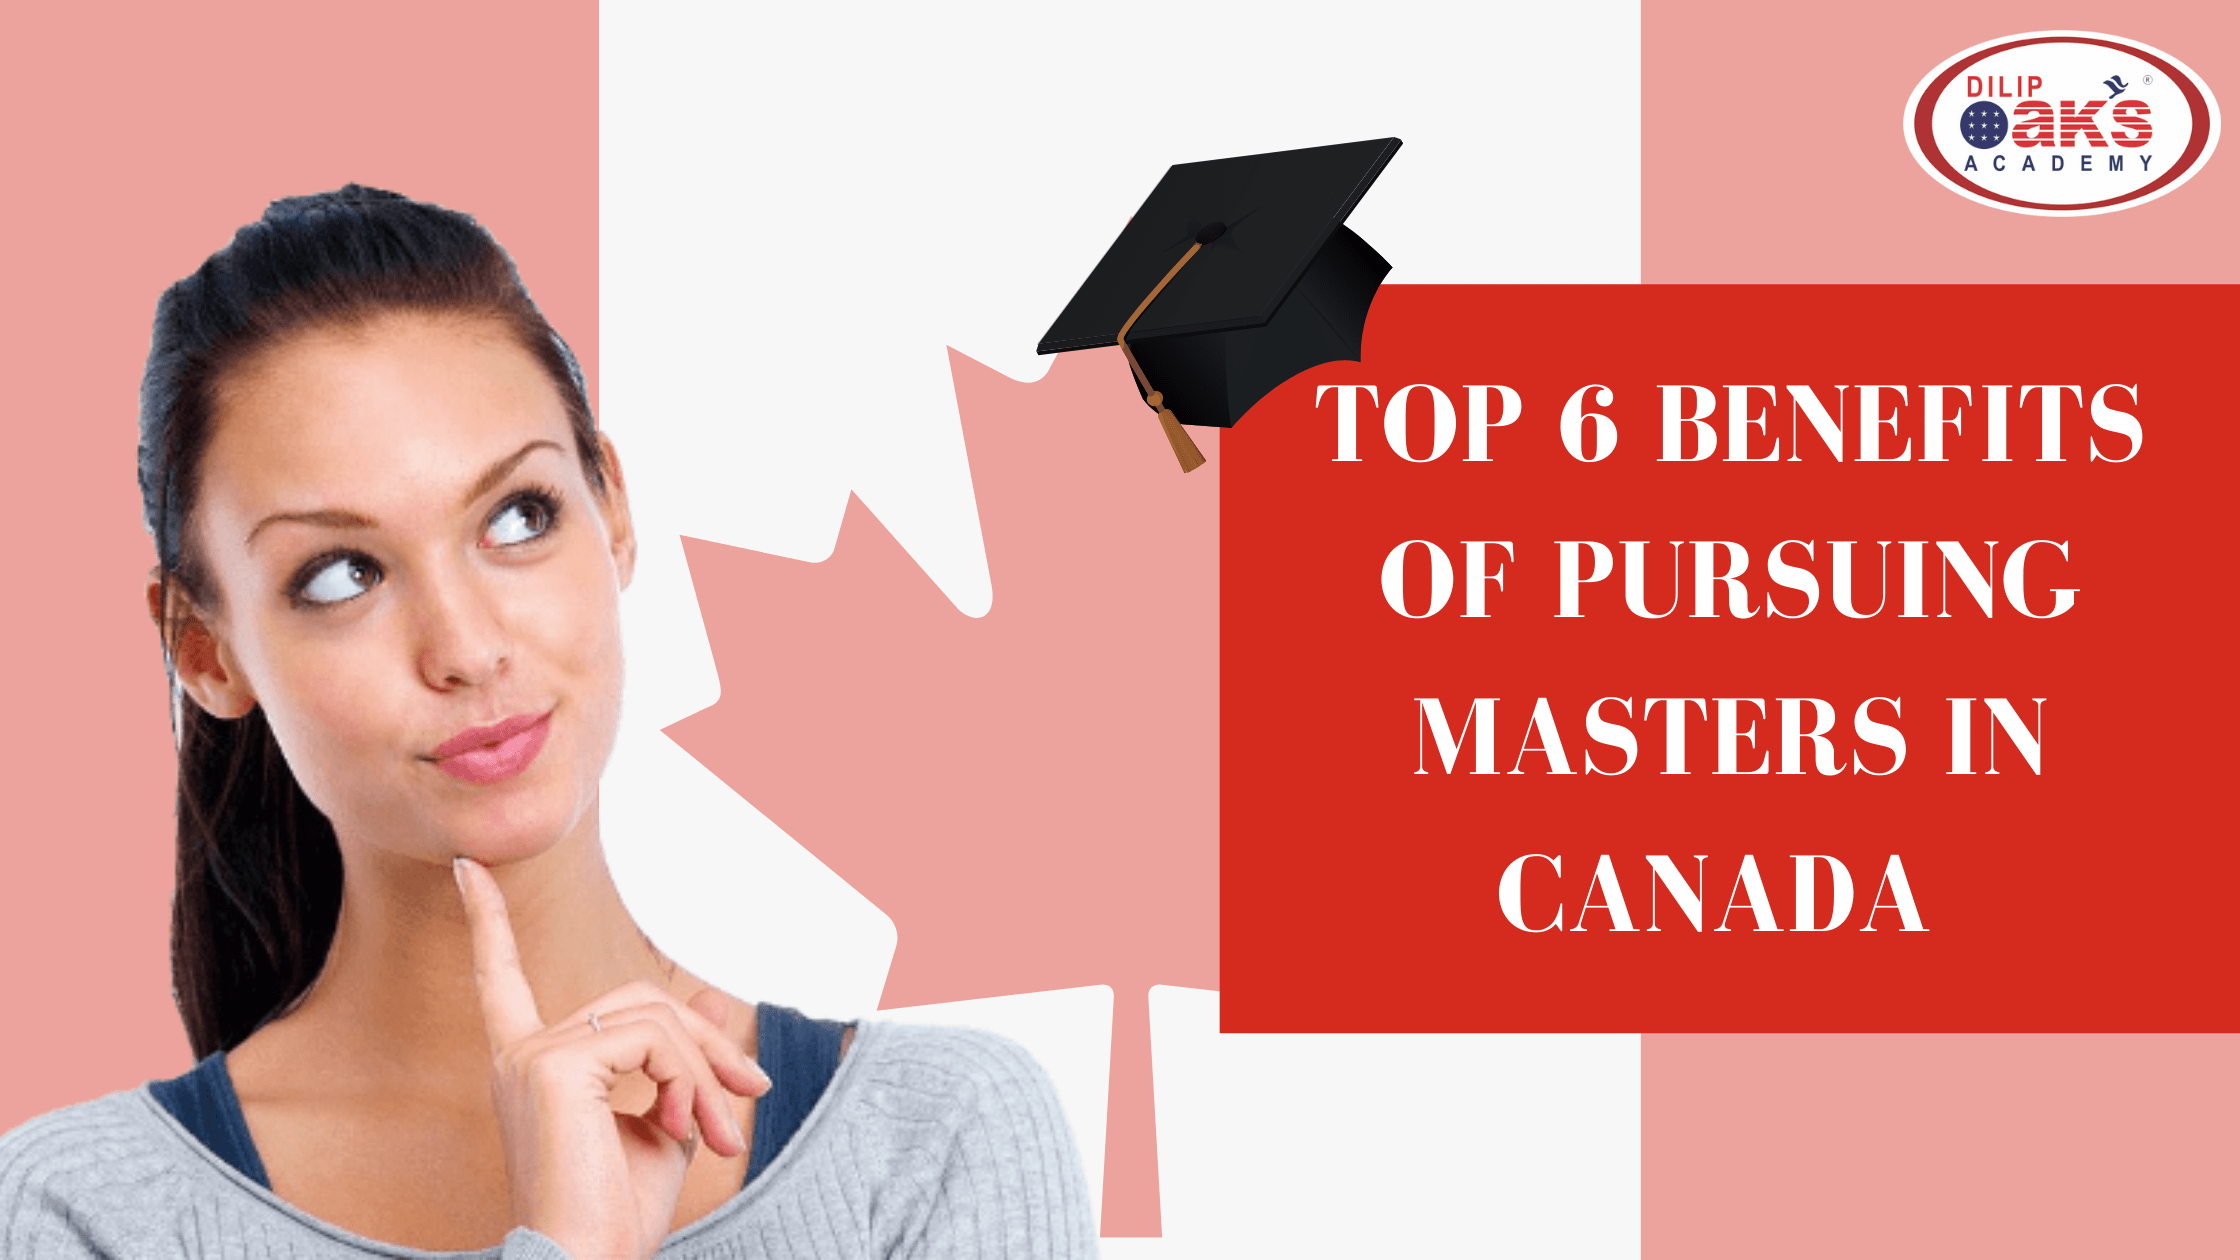 TOP 6 BENEFITS OF PURSUING MASTERS IN CANADA